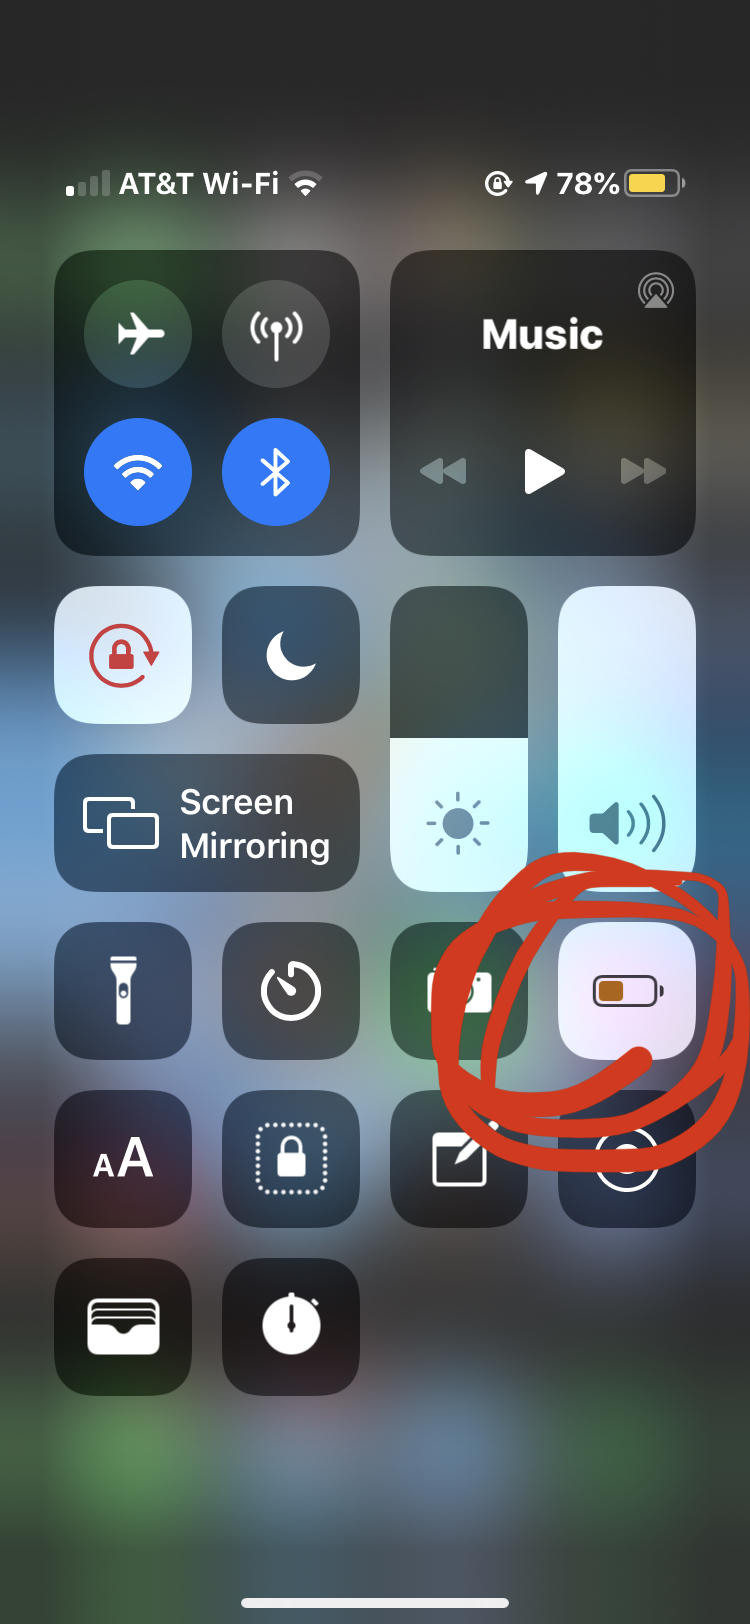 How to Quickly Turn On Low Power Mode on iPhone via Control Center